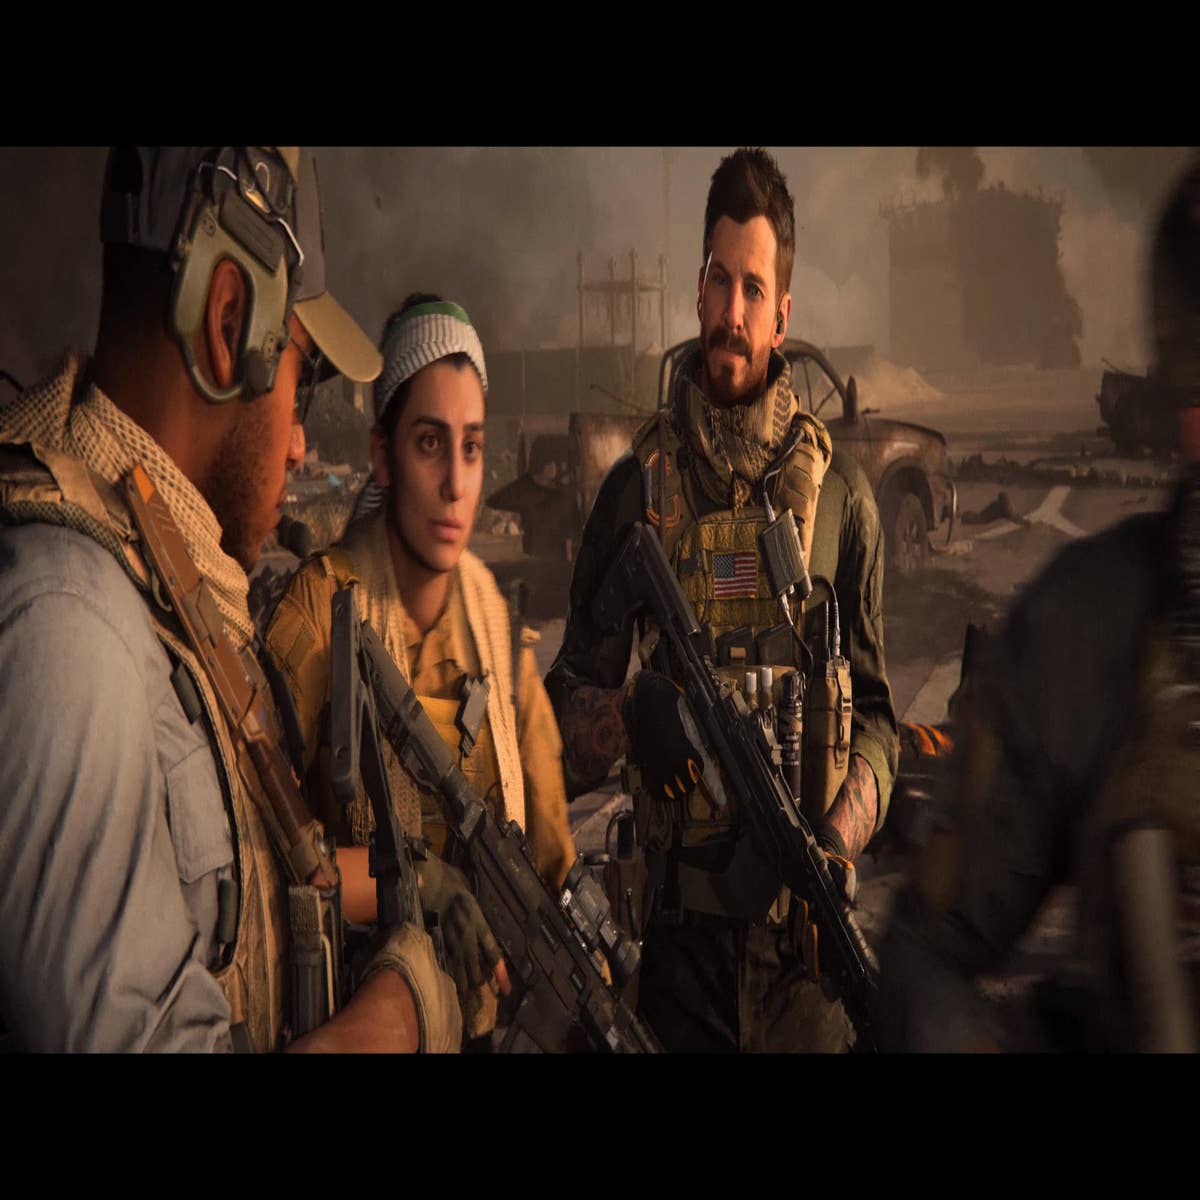 Even by Call of Duty standards, Modern Warfare 3's campaign is very short